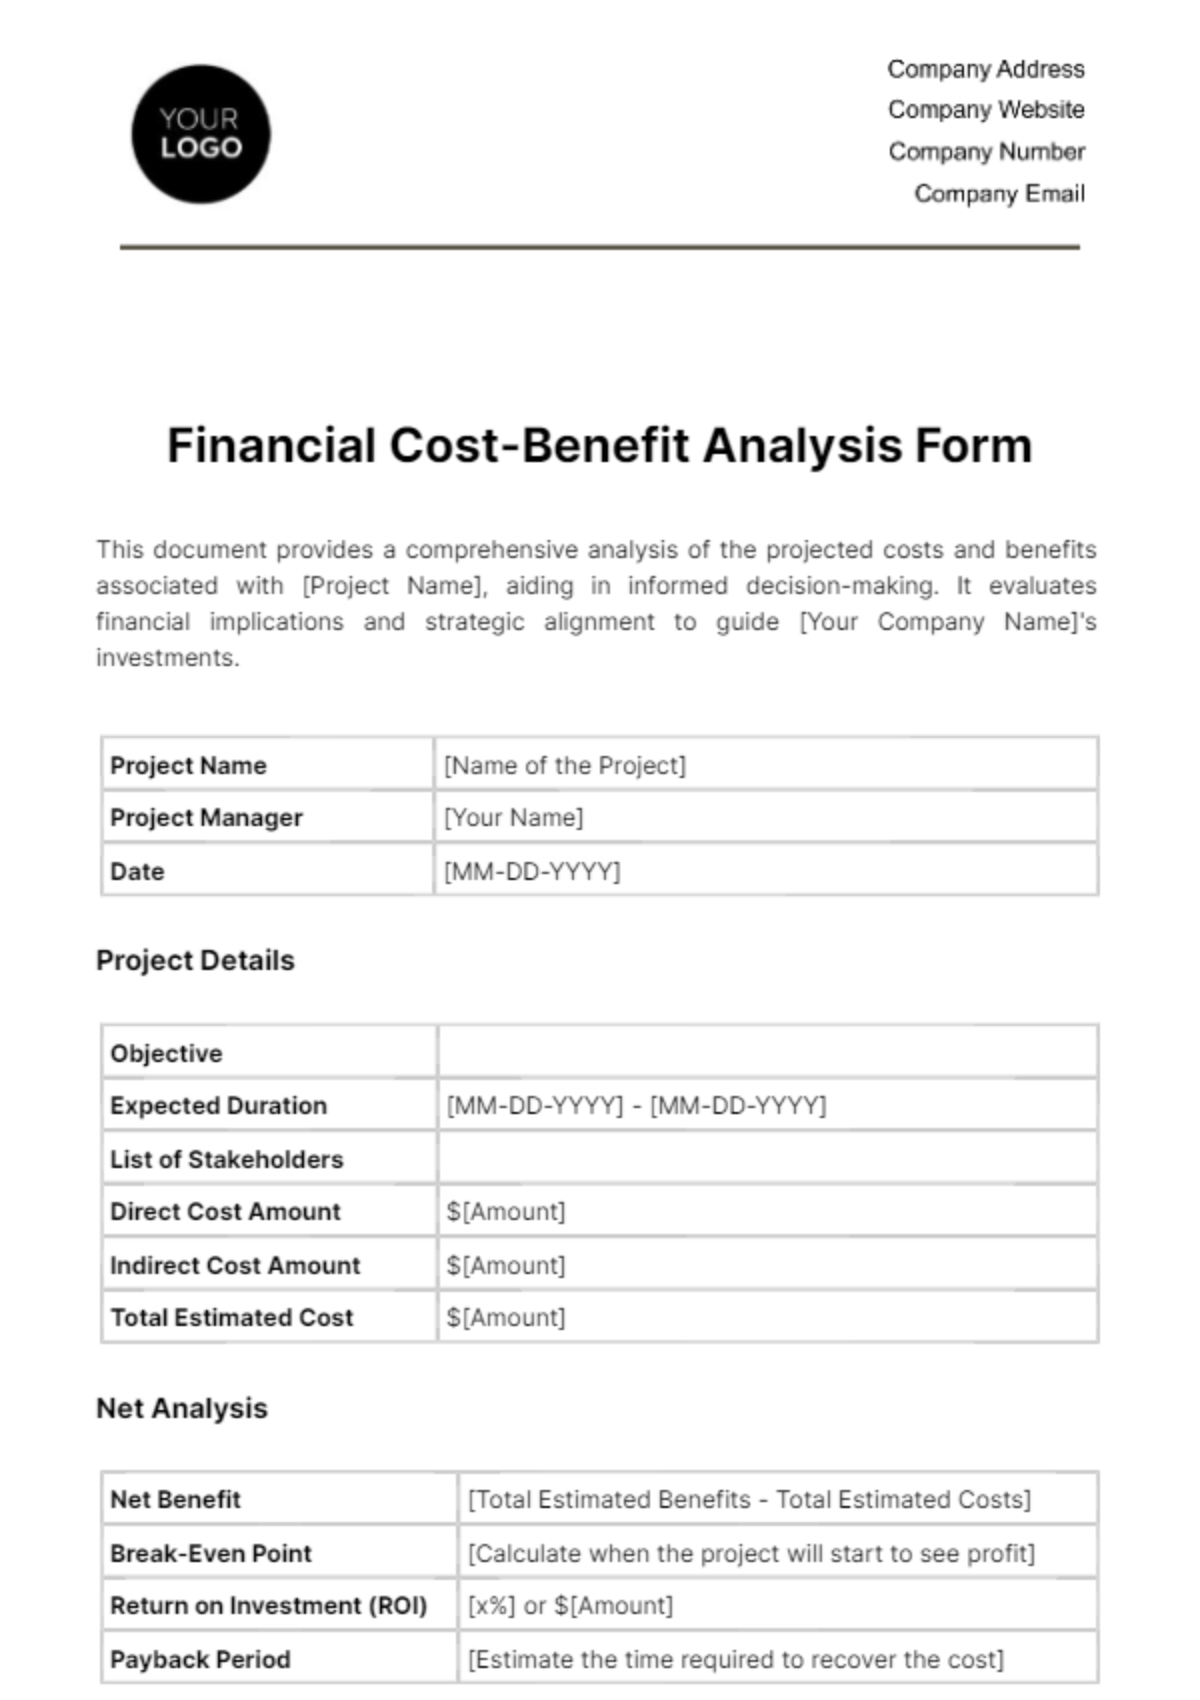 Free Financial Cost-Benefit Analysis Form Template